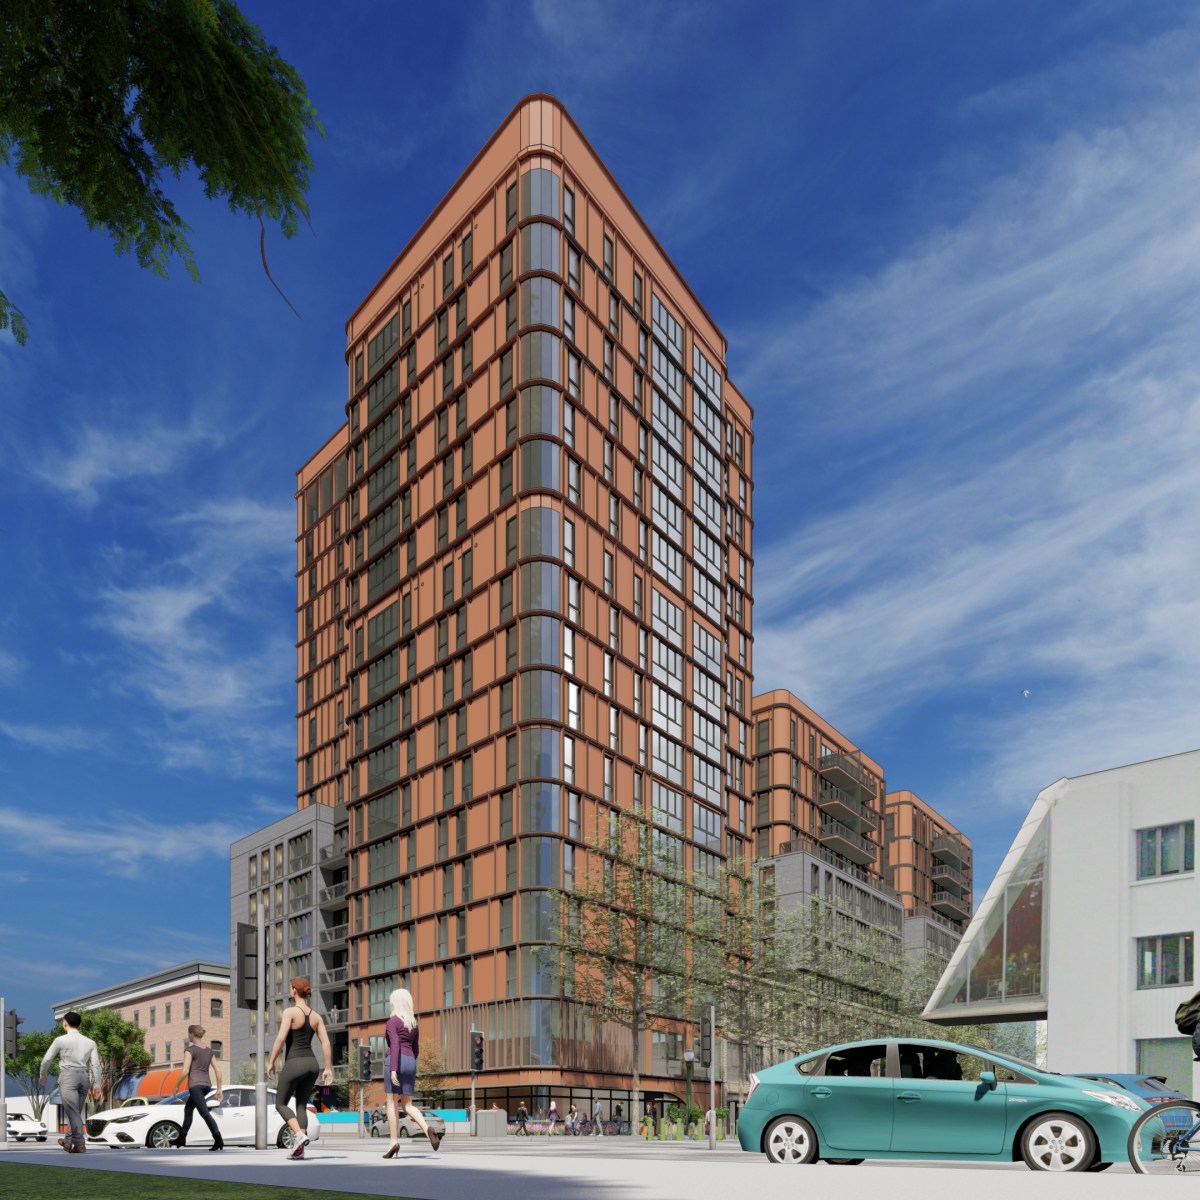 Developer proposes 17-story apartment building across from UC Berkeley